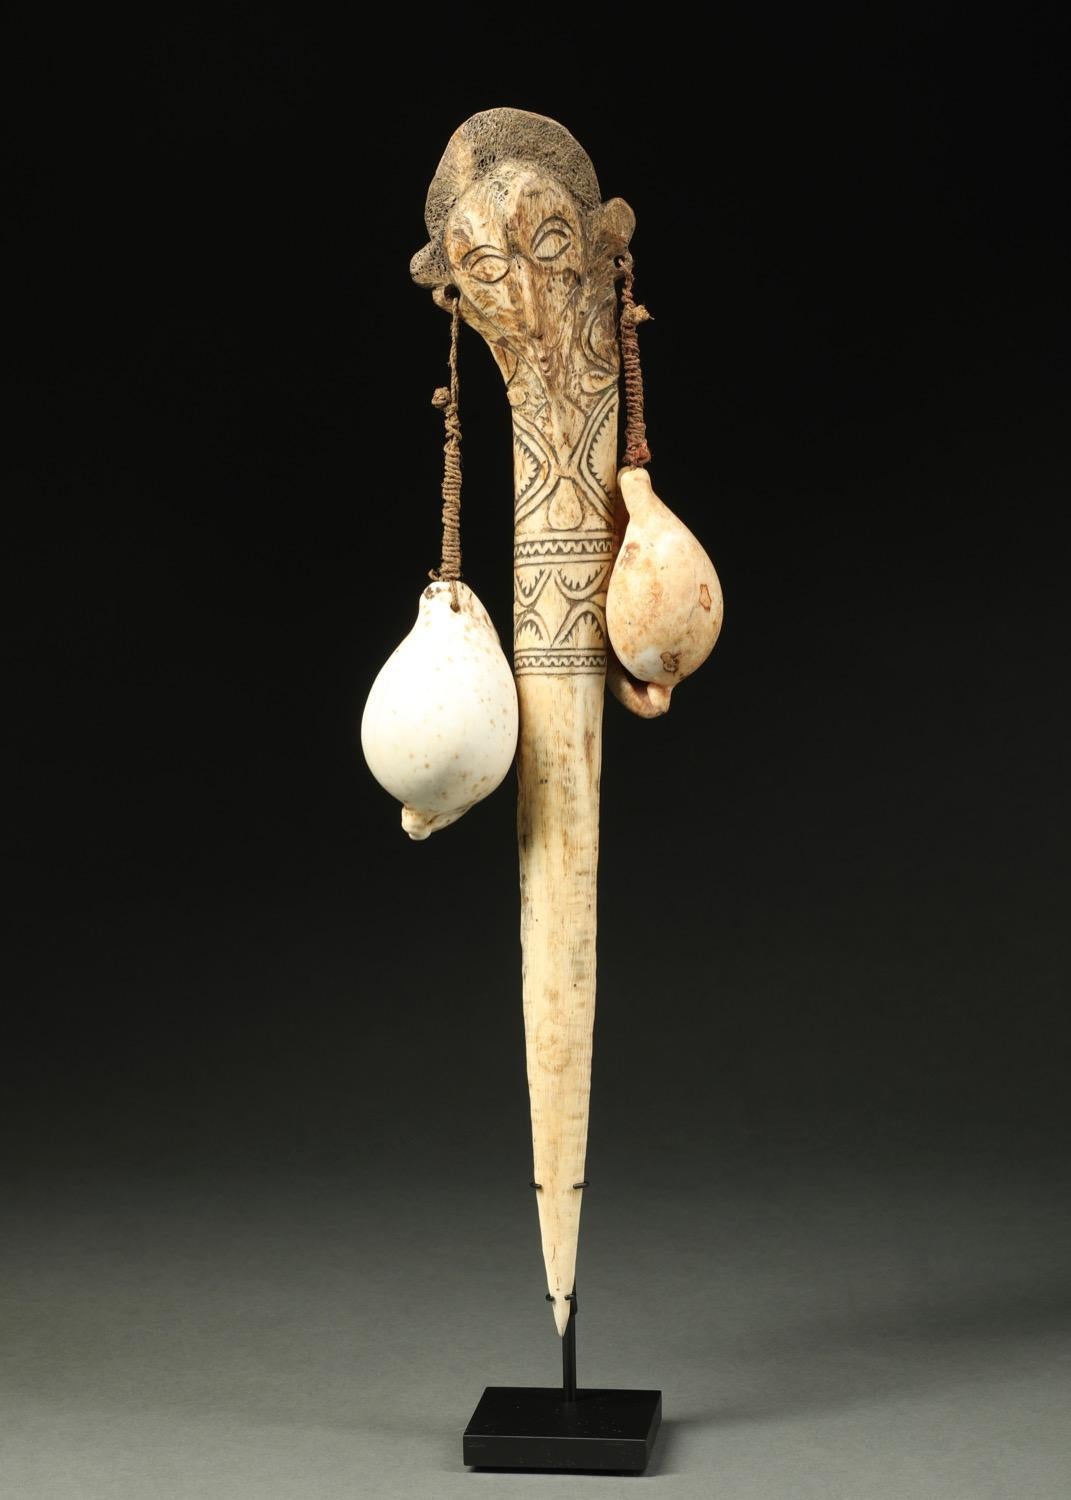 An unusual Abelam ceremonial dagger made from Cassowary bird bone with a sensitive face and two large shell earrings. The bone is carved with a face at the top and intricate incising on the front. The large shell earrings are attached with natural